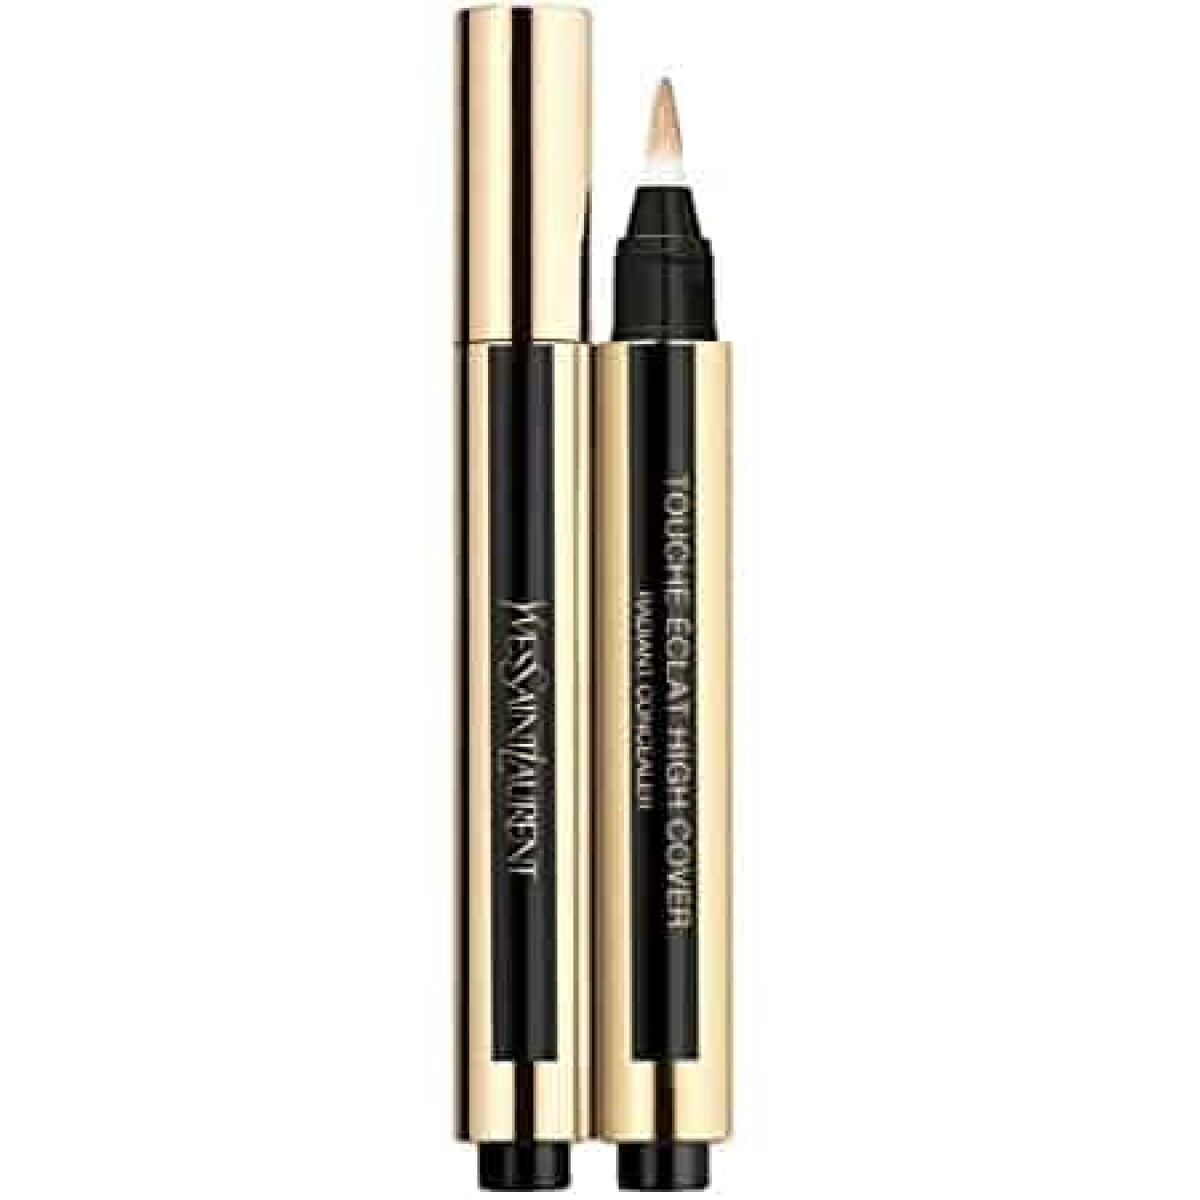 Ysl Touche Eclat High Cover 3 